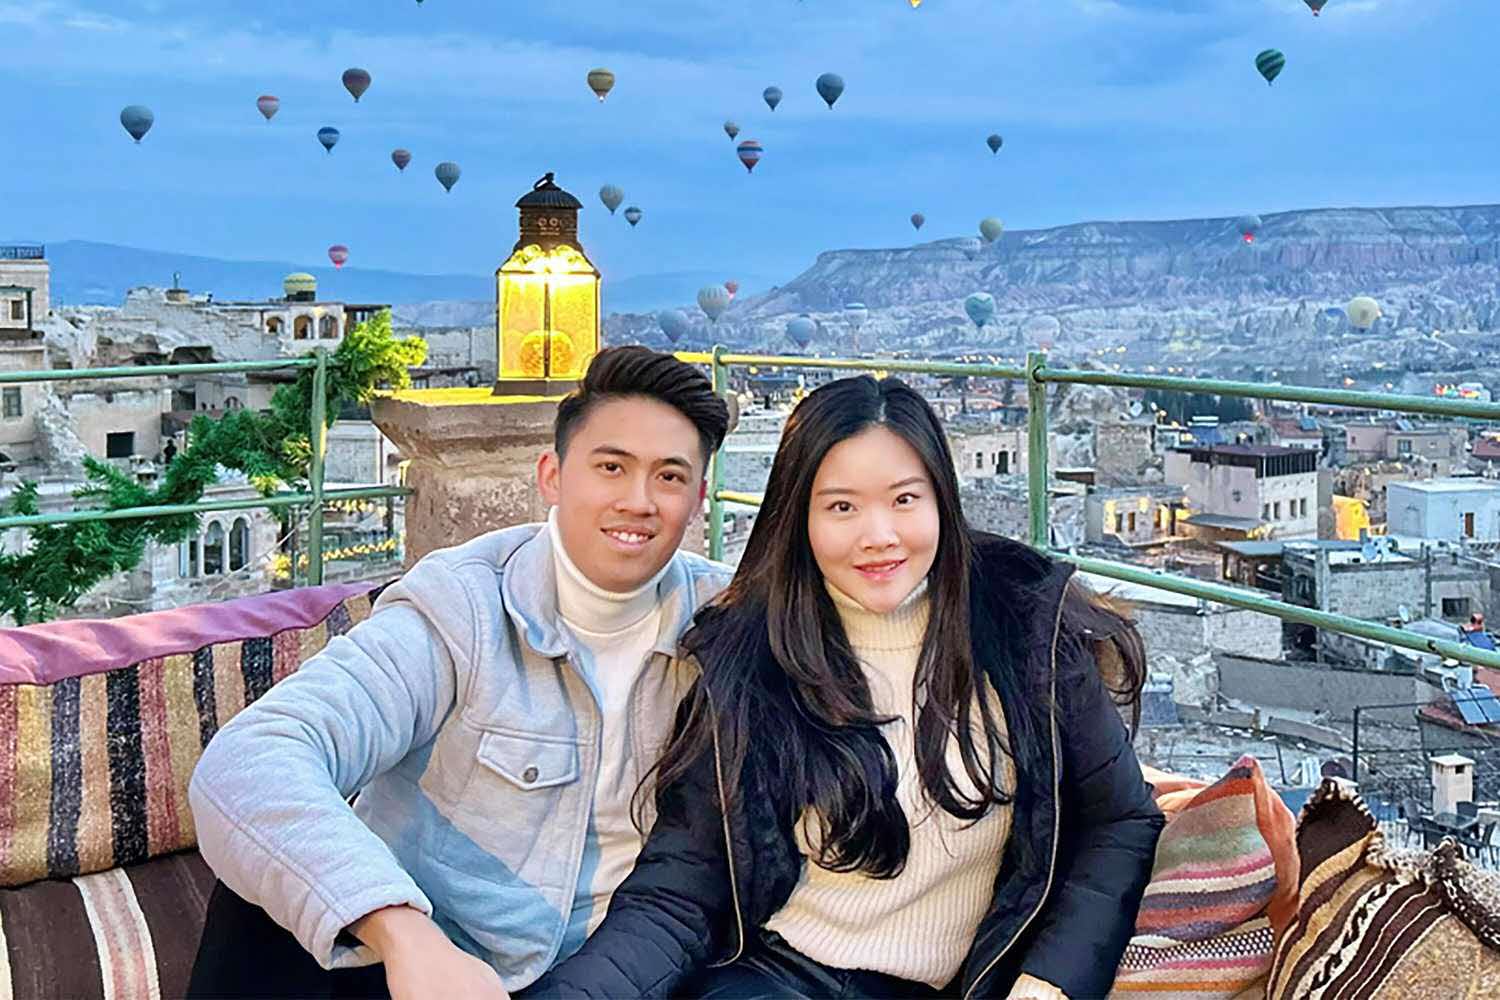 a couple on holiday at turkey, with hot air balloons